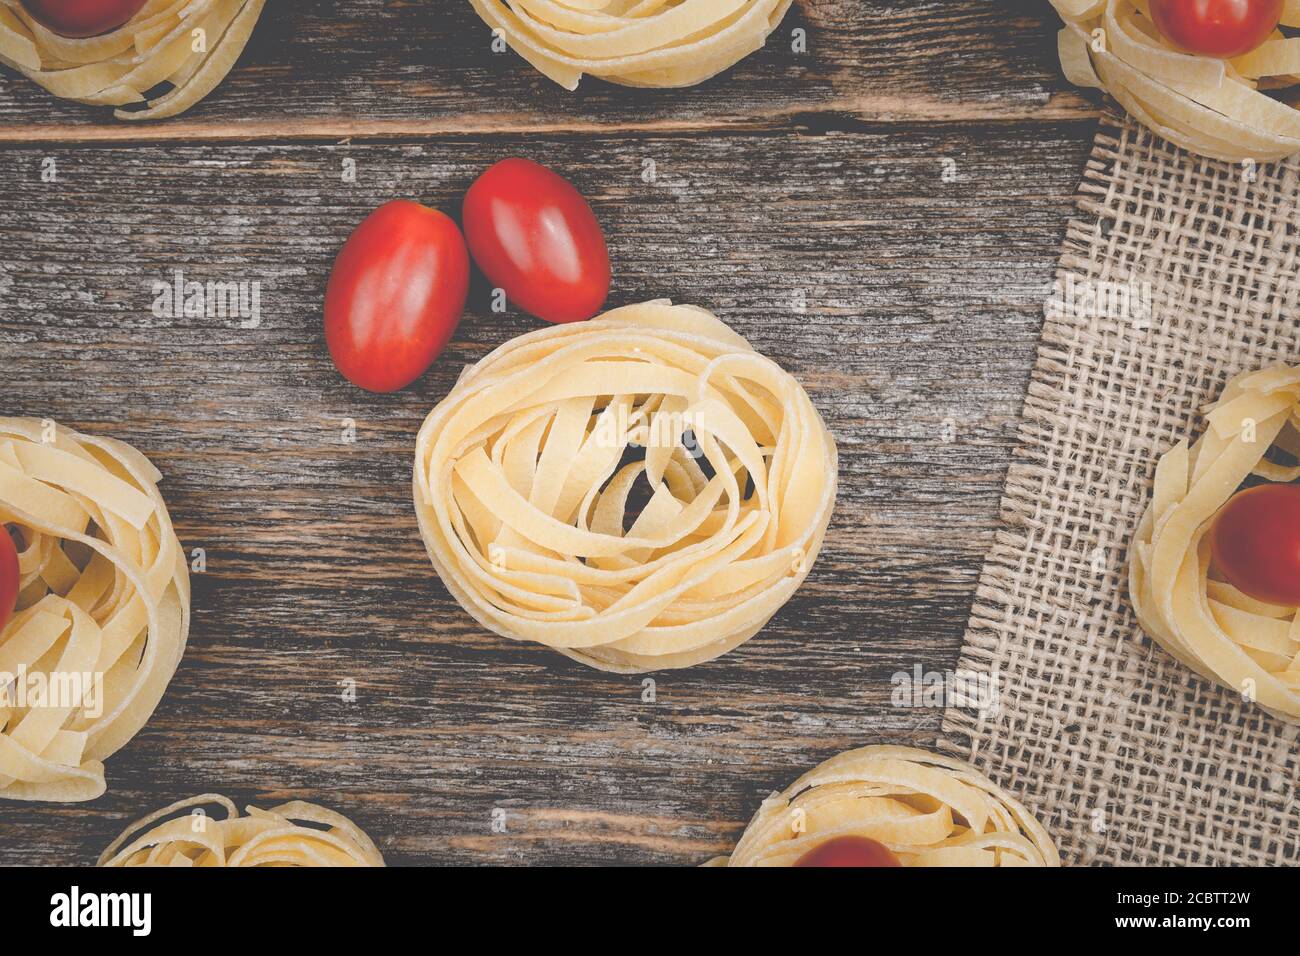 Close up ofnests of tagliatelle noodles with egg-shaped mini roma tomatoes on a rustic wooden table wit burlap, Stock Photo